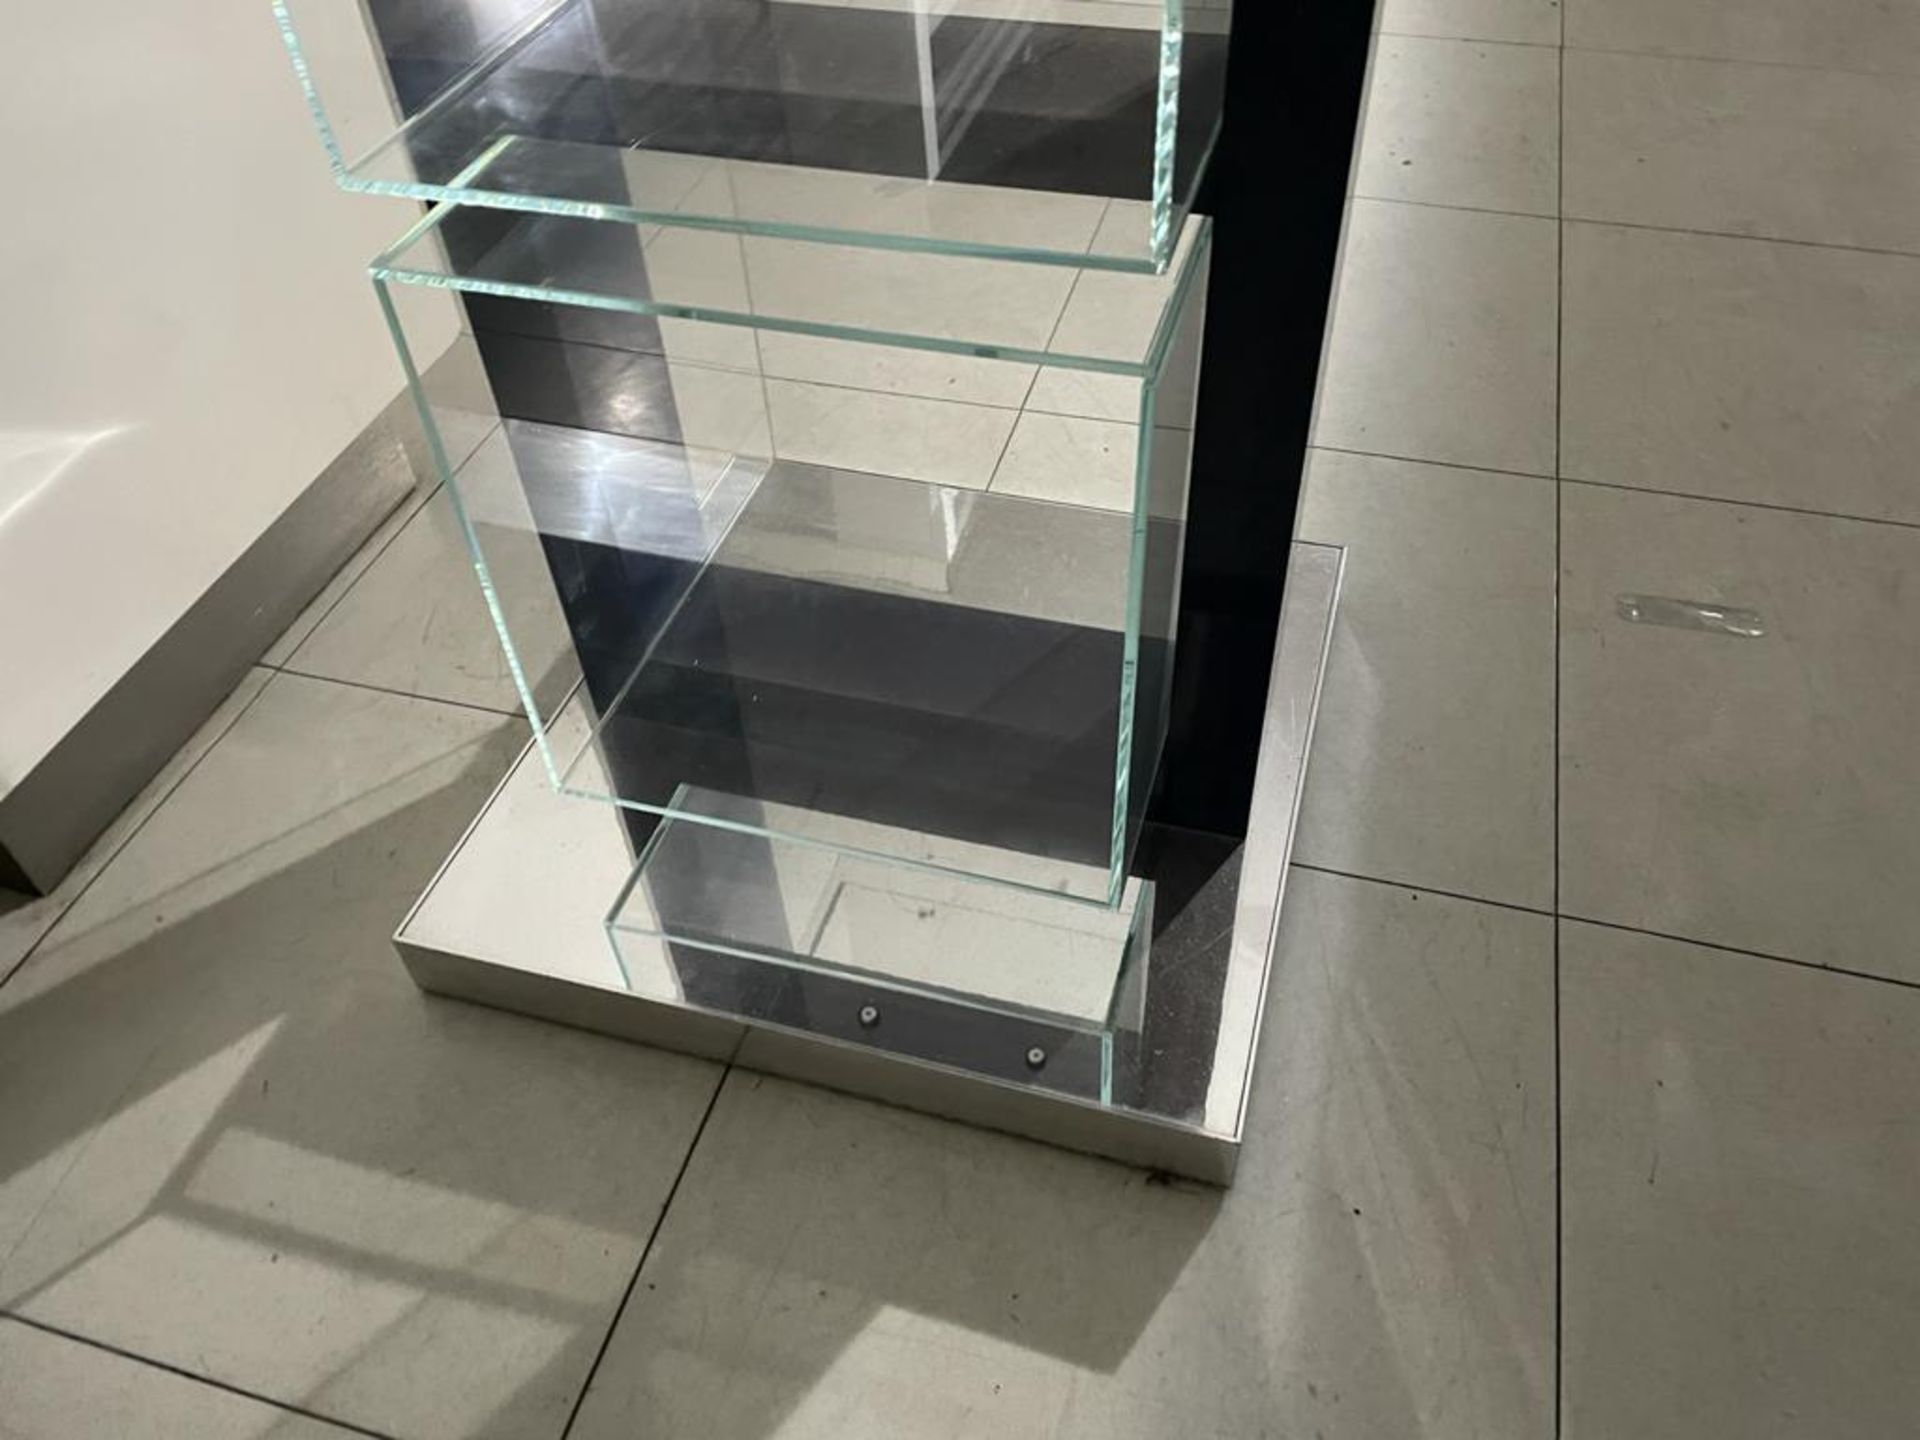 1 x Estee Lauder Free Standing Retail Display Unit With Glass Cube Display Shelves - Size H175 x W49 - Image 6 of 8